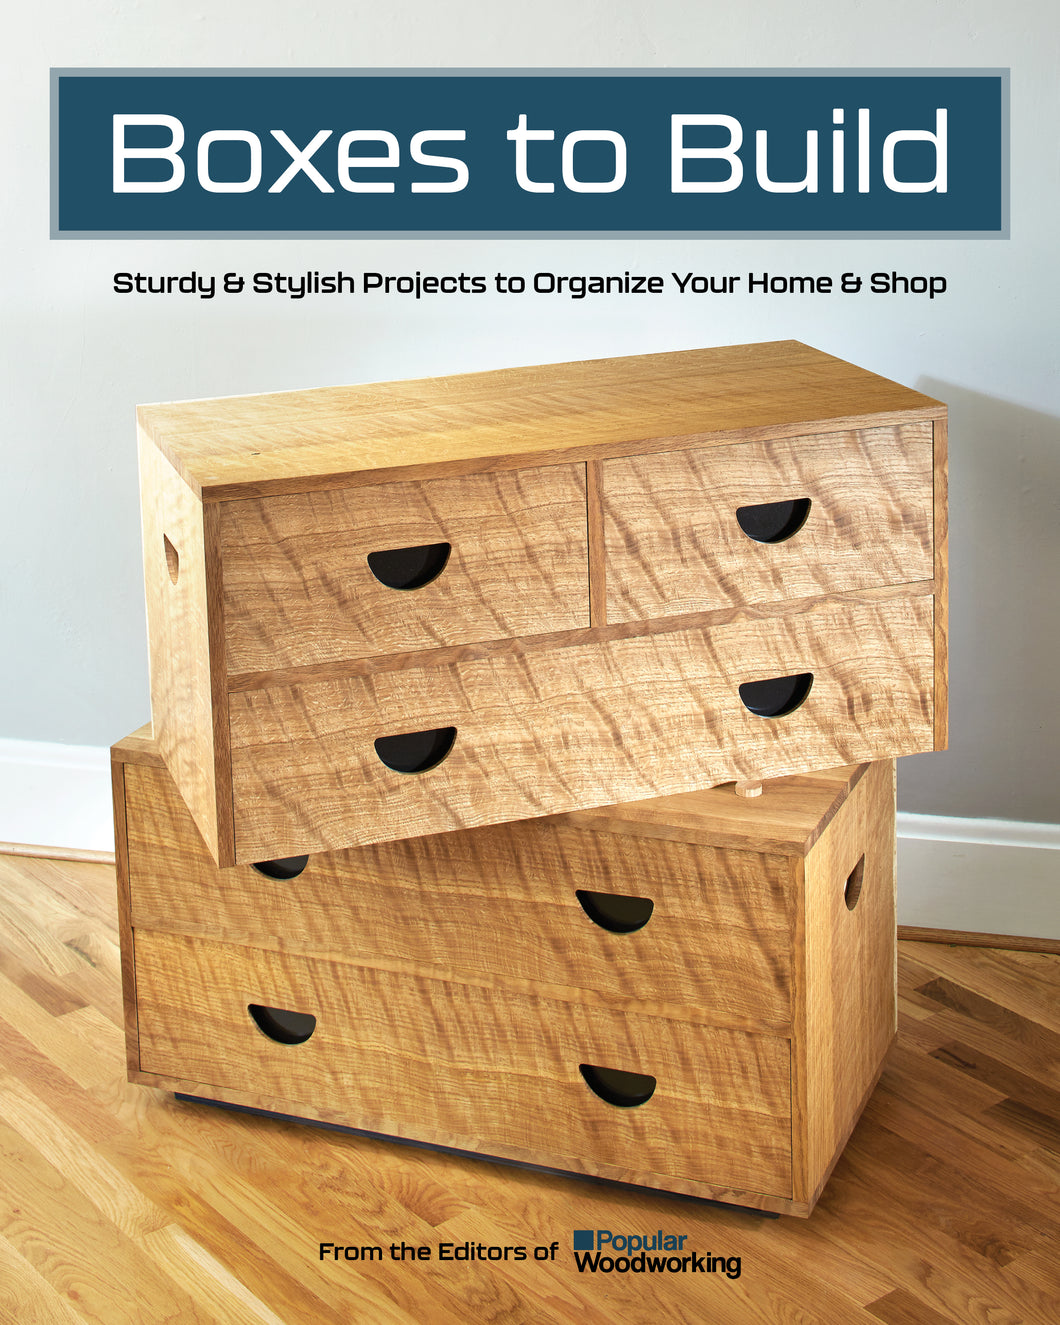 Boxes to Build